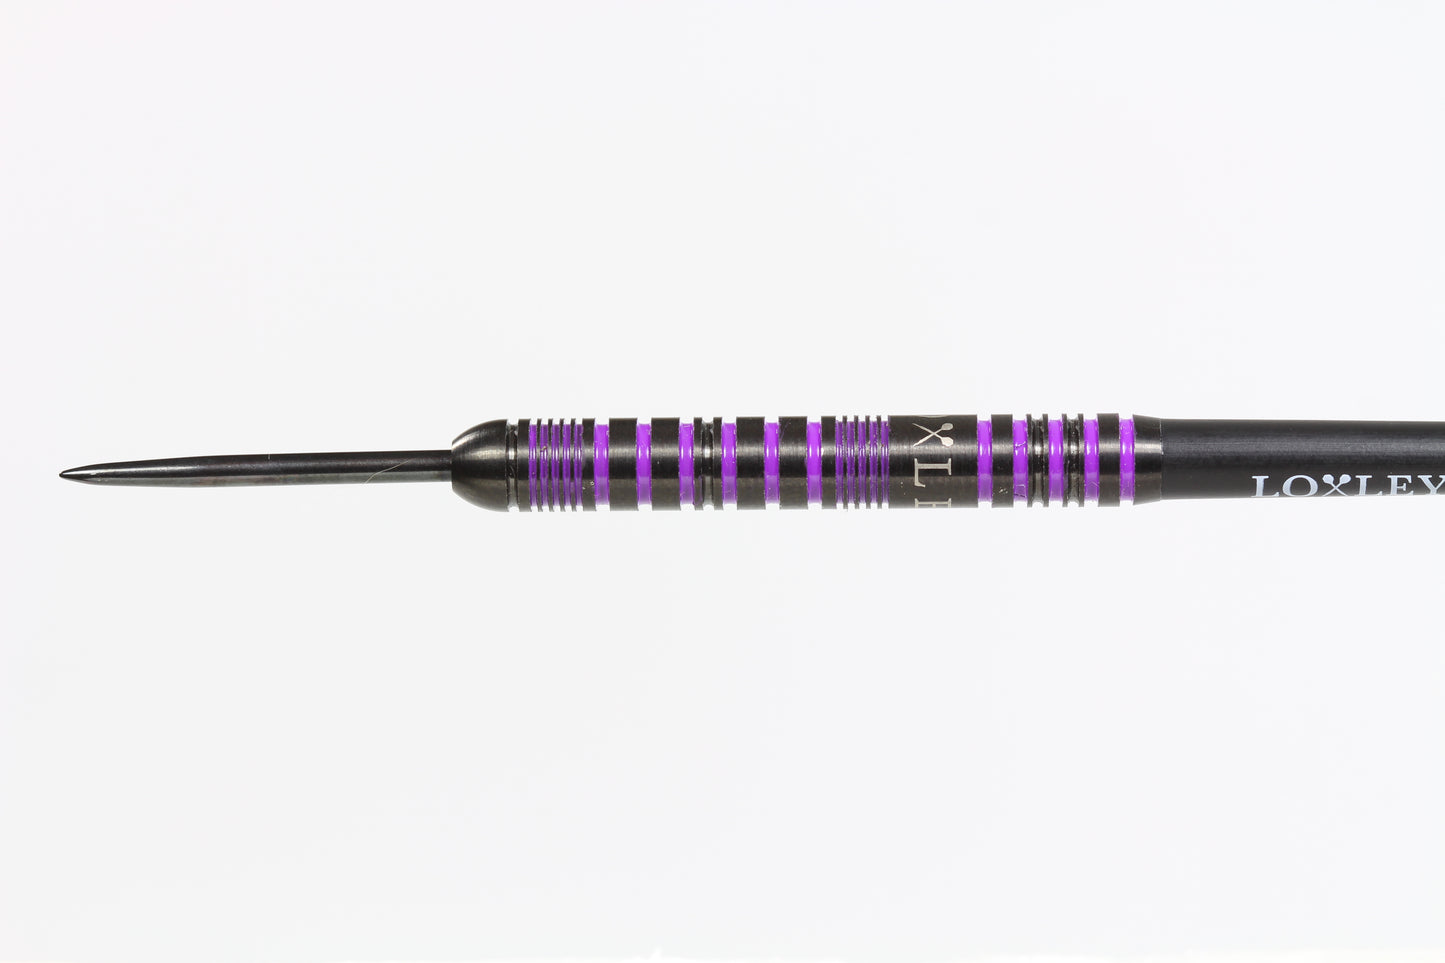 Loxley - The Cyclone Darts